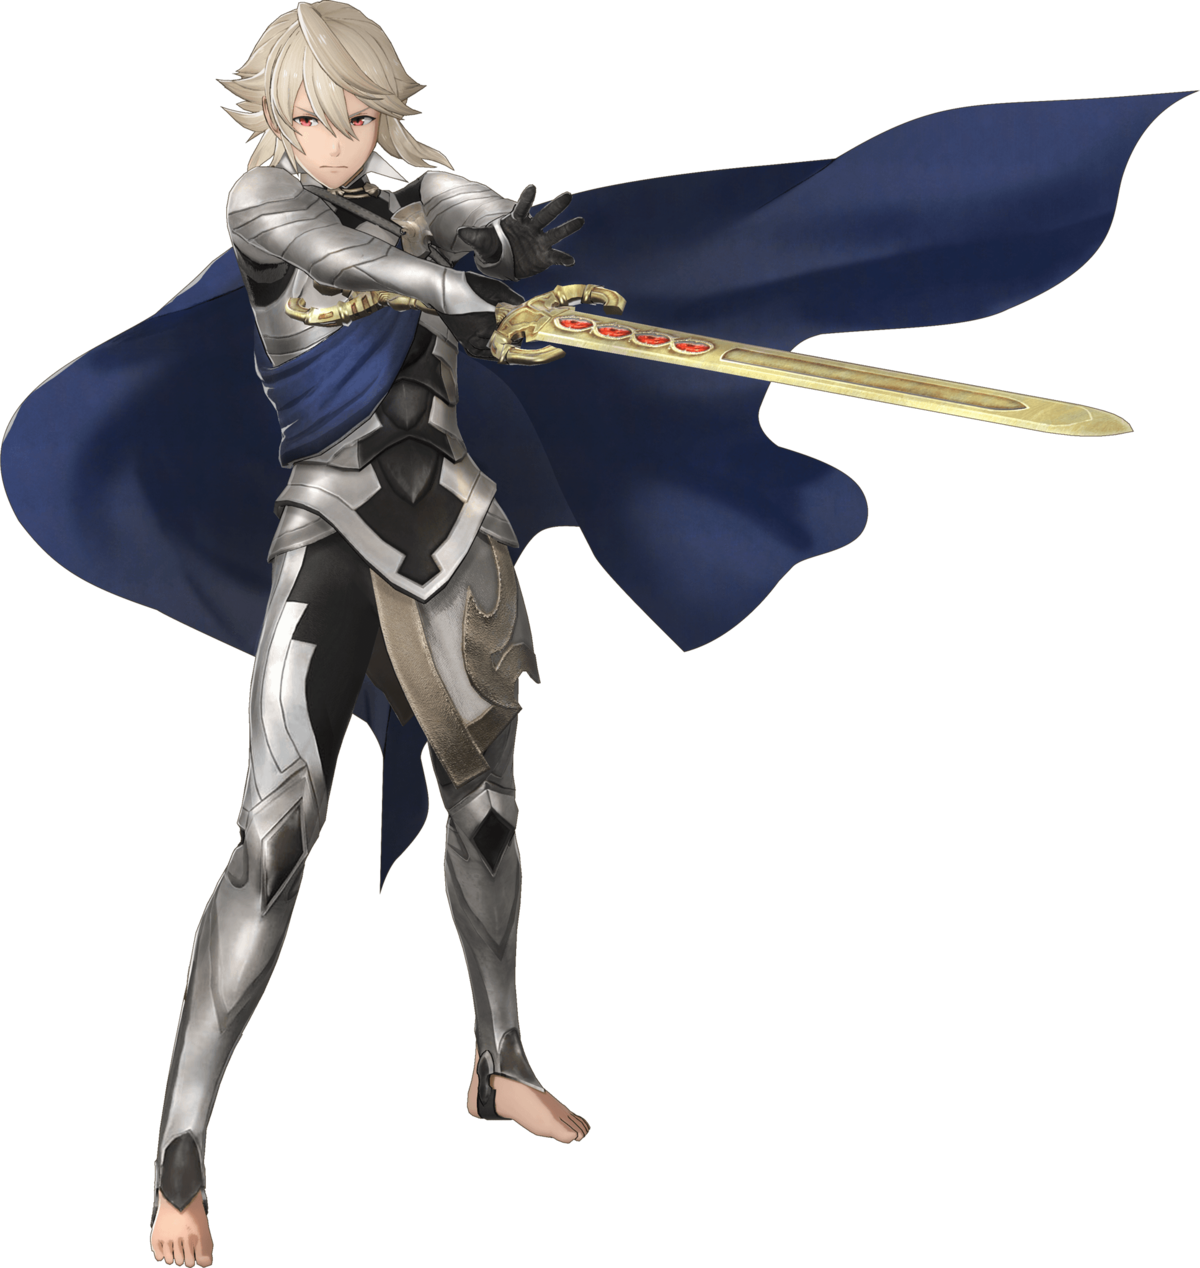 Lucina was originally conceived as Marth's alt costume, Robin's